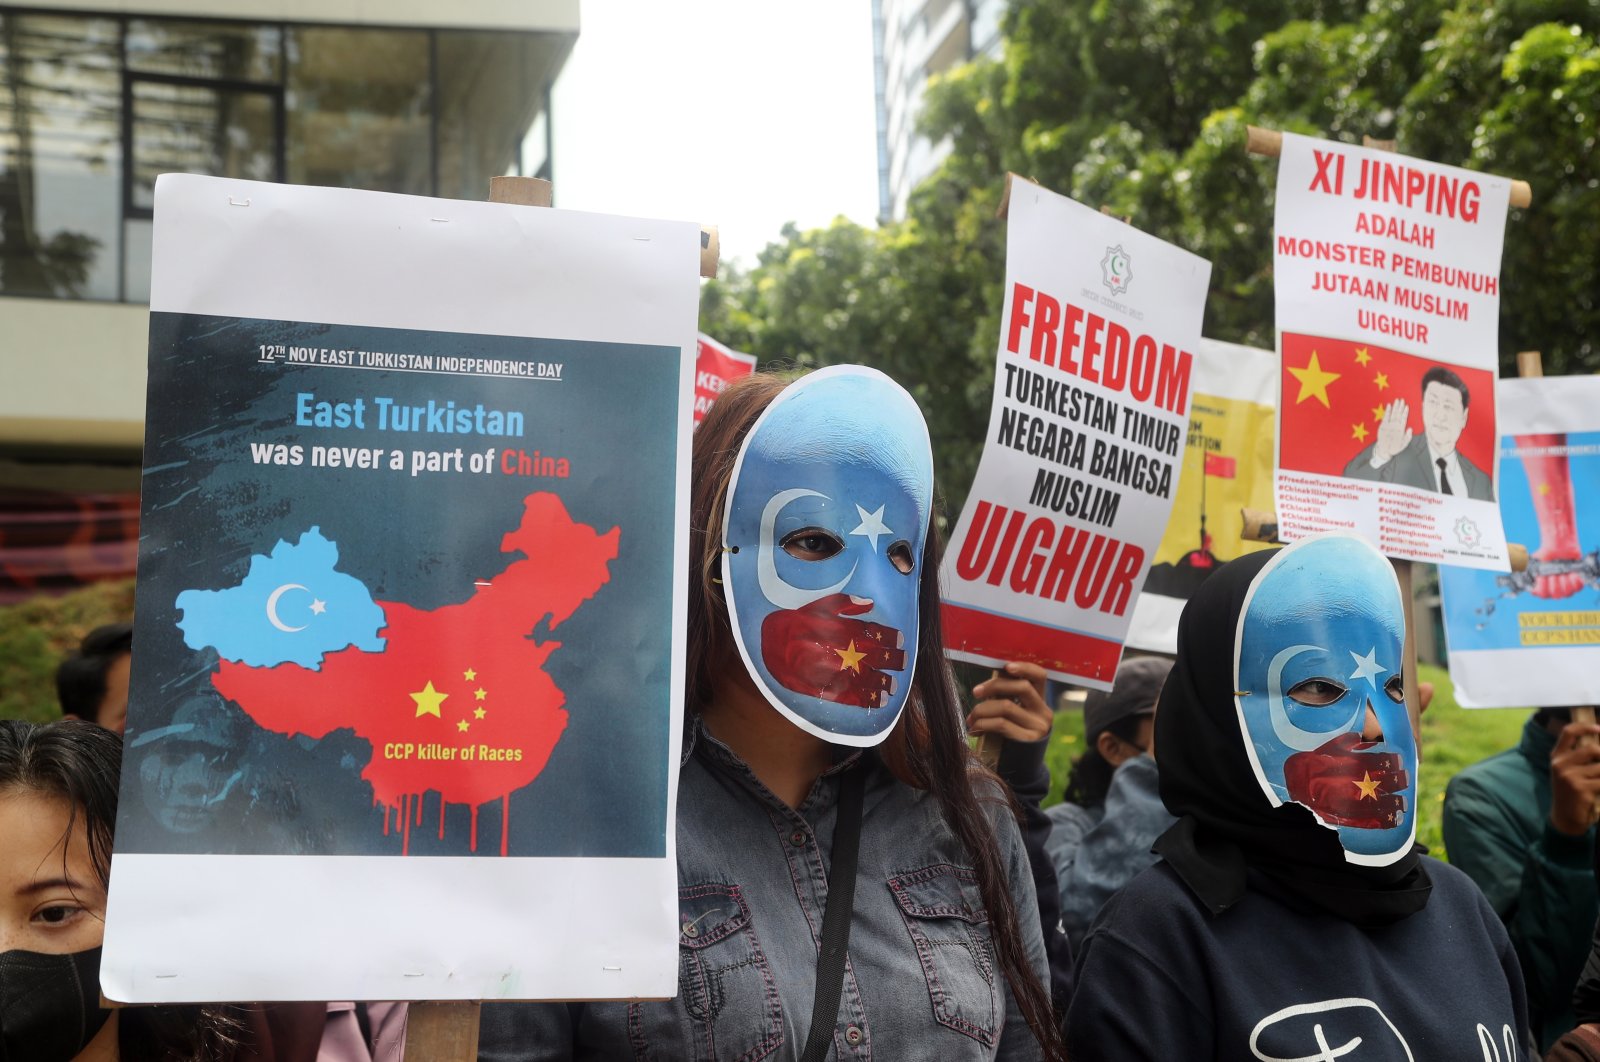 Students protest outside the Chinese Embassy, accusing China of violence against Uyghurs, Jakarta, Indonesia, Nov. 11, 2022. (EPA Photo)